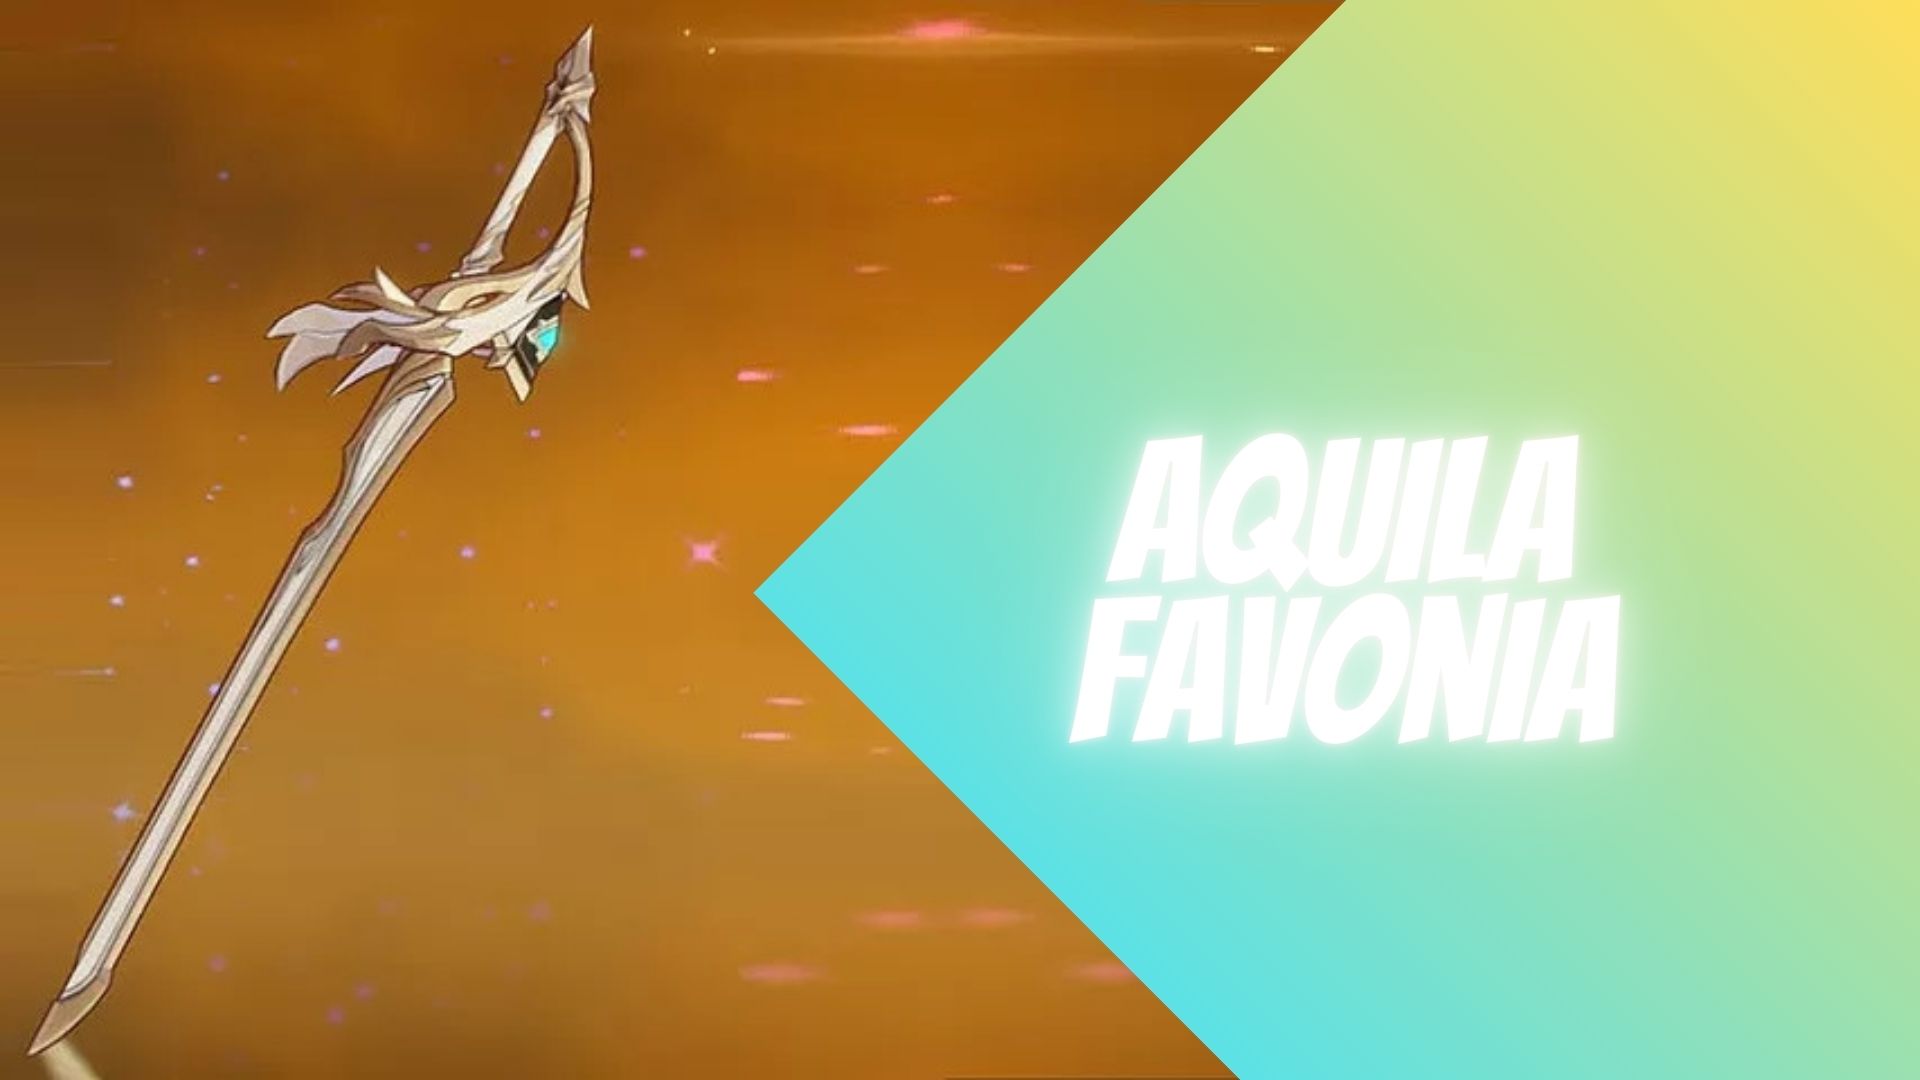 Keqing's Best Weapons: Aquila Favonia